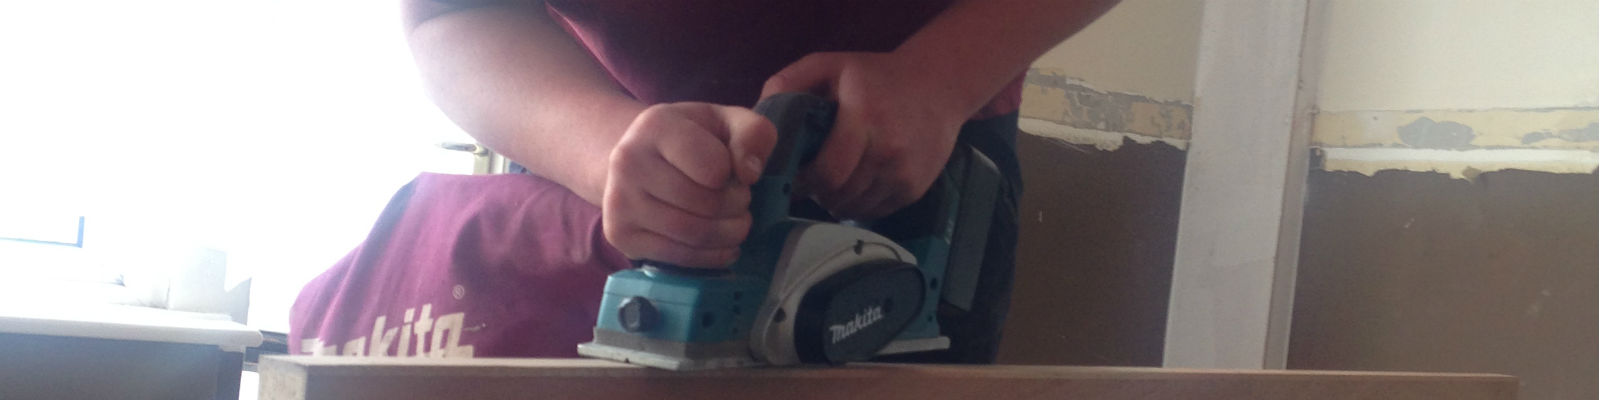 An apprentice using a electric saw